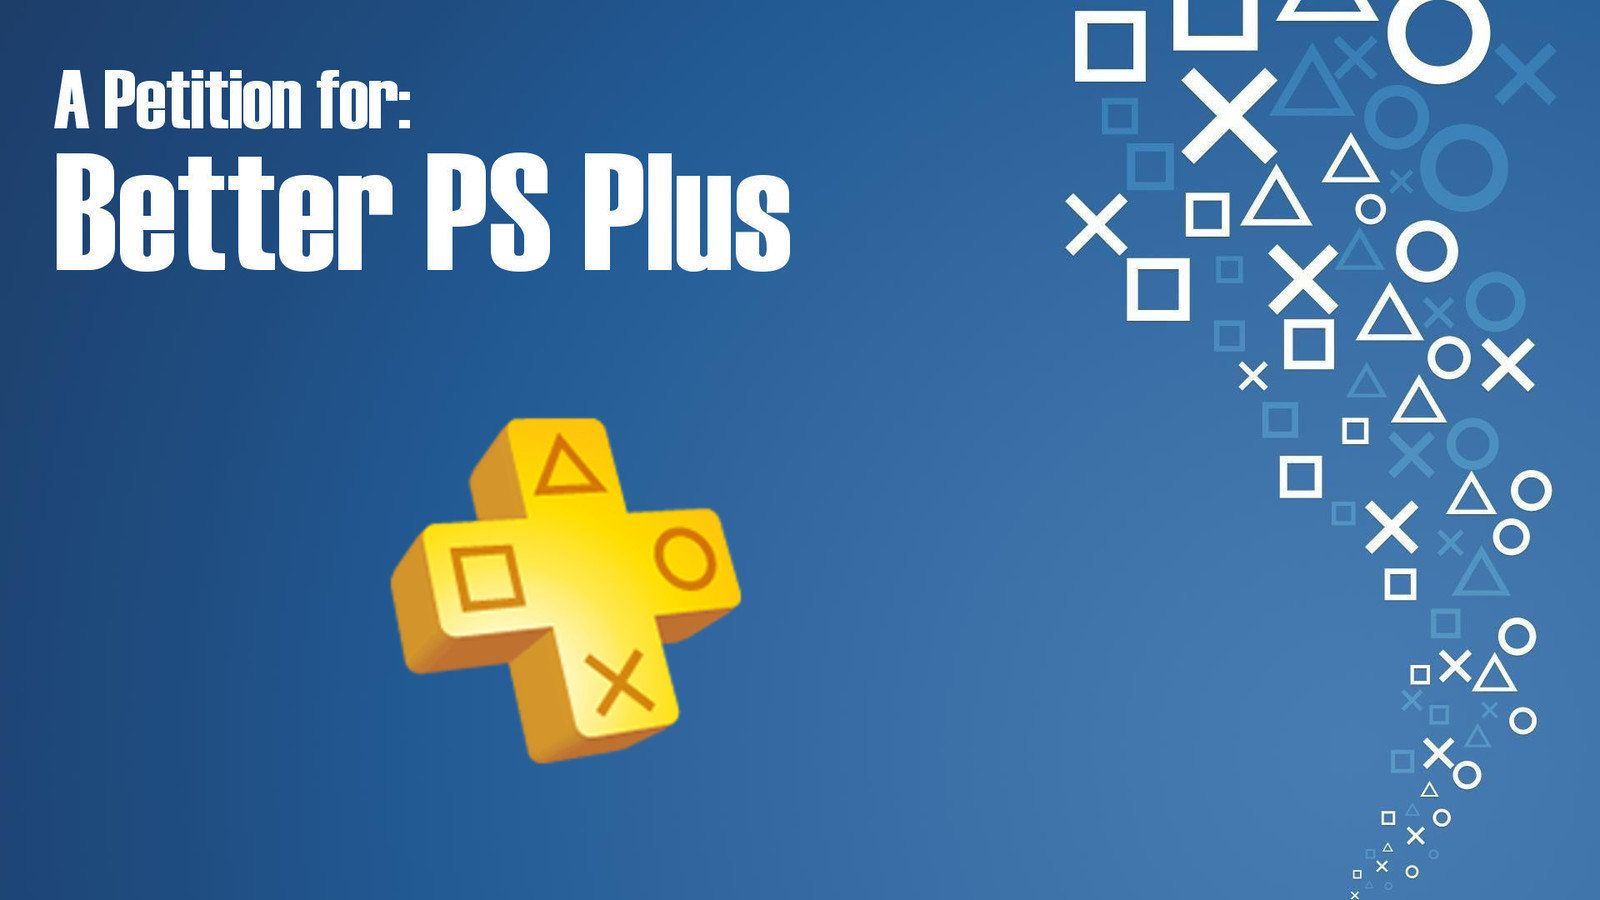 Topic · Ps plus · Change.org